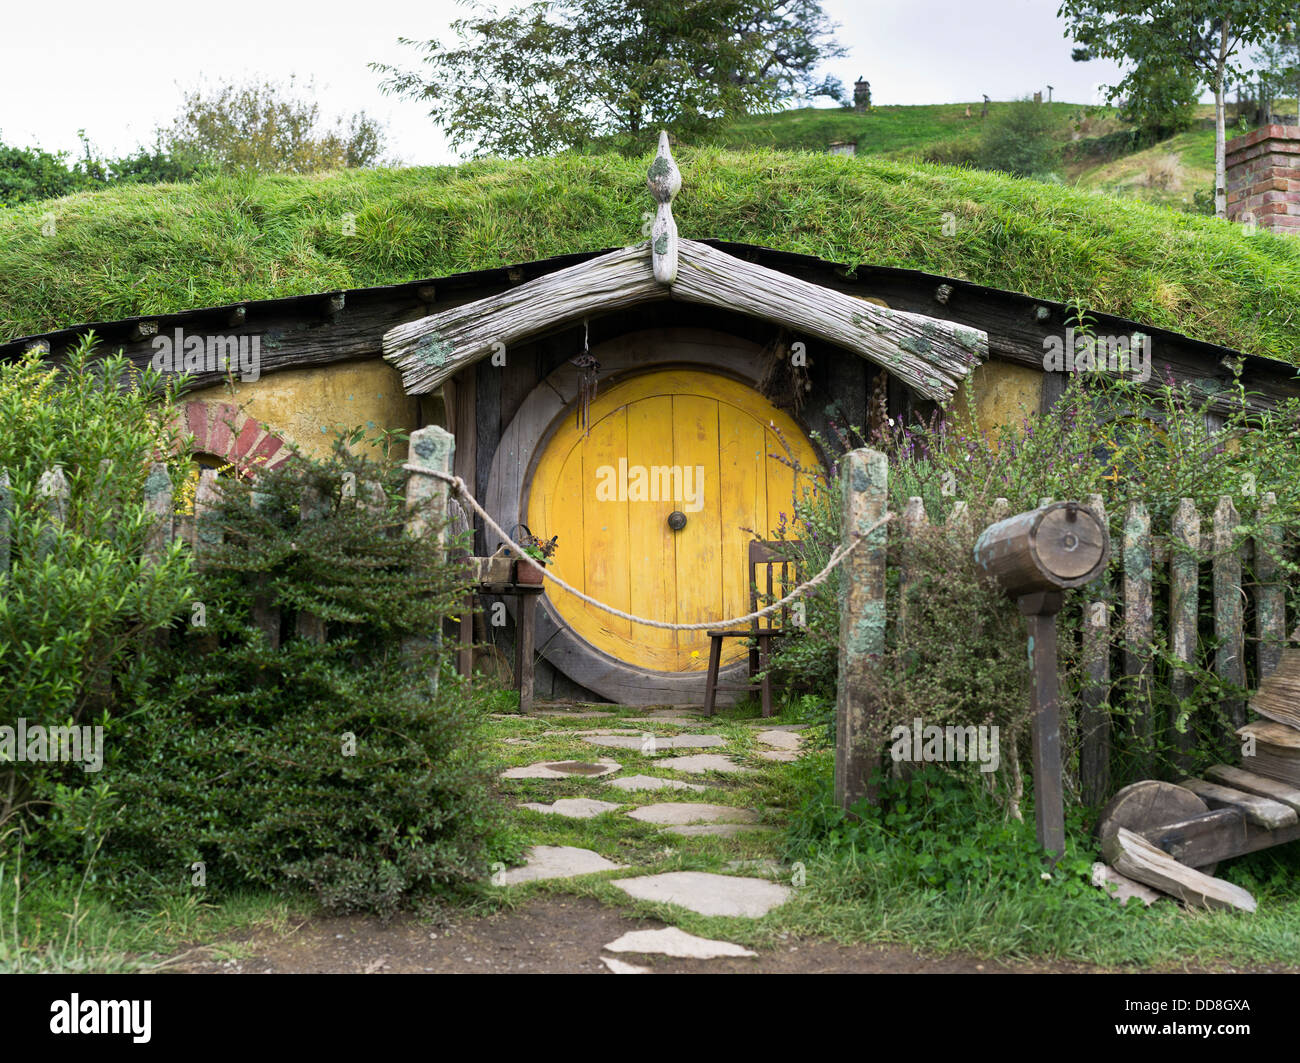 dh Hobbits cottage door HOBBITON NEW ZEALAND Garden film set movie site Lord of the Rings films hobbit house middle earth Stock Photo